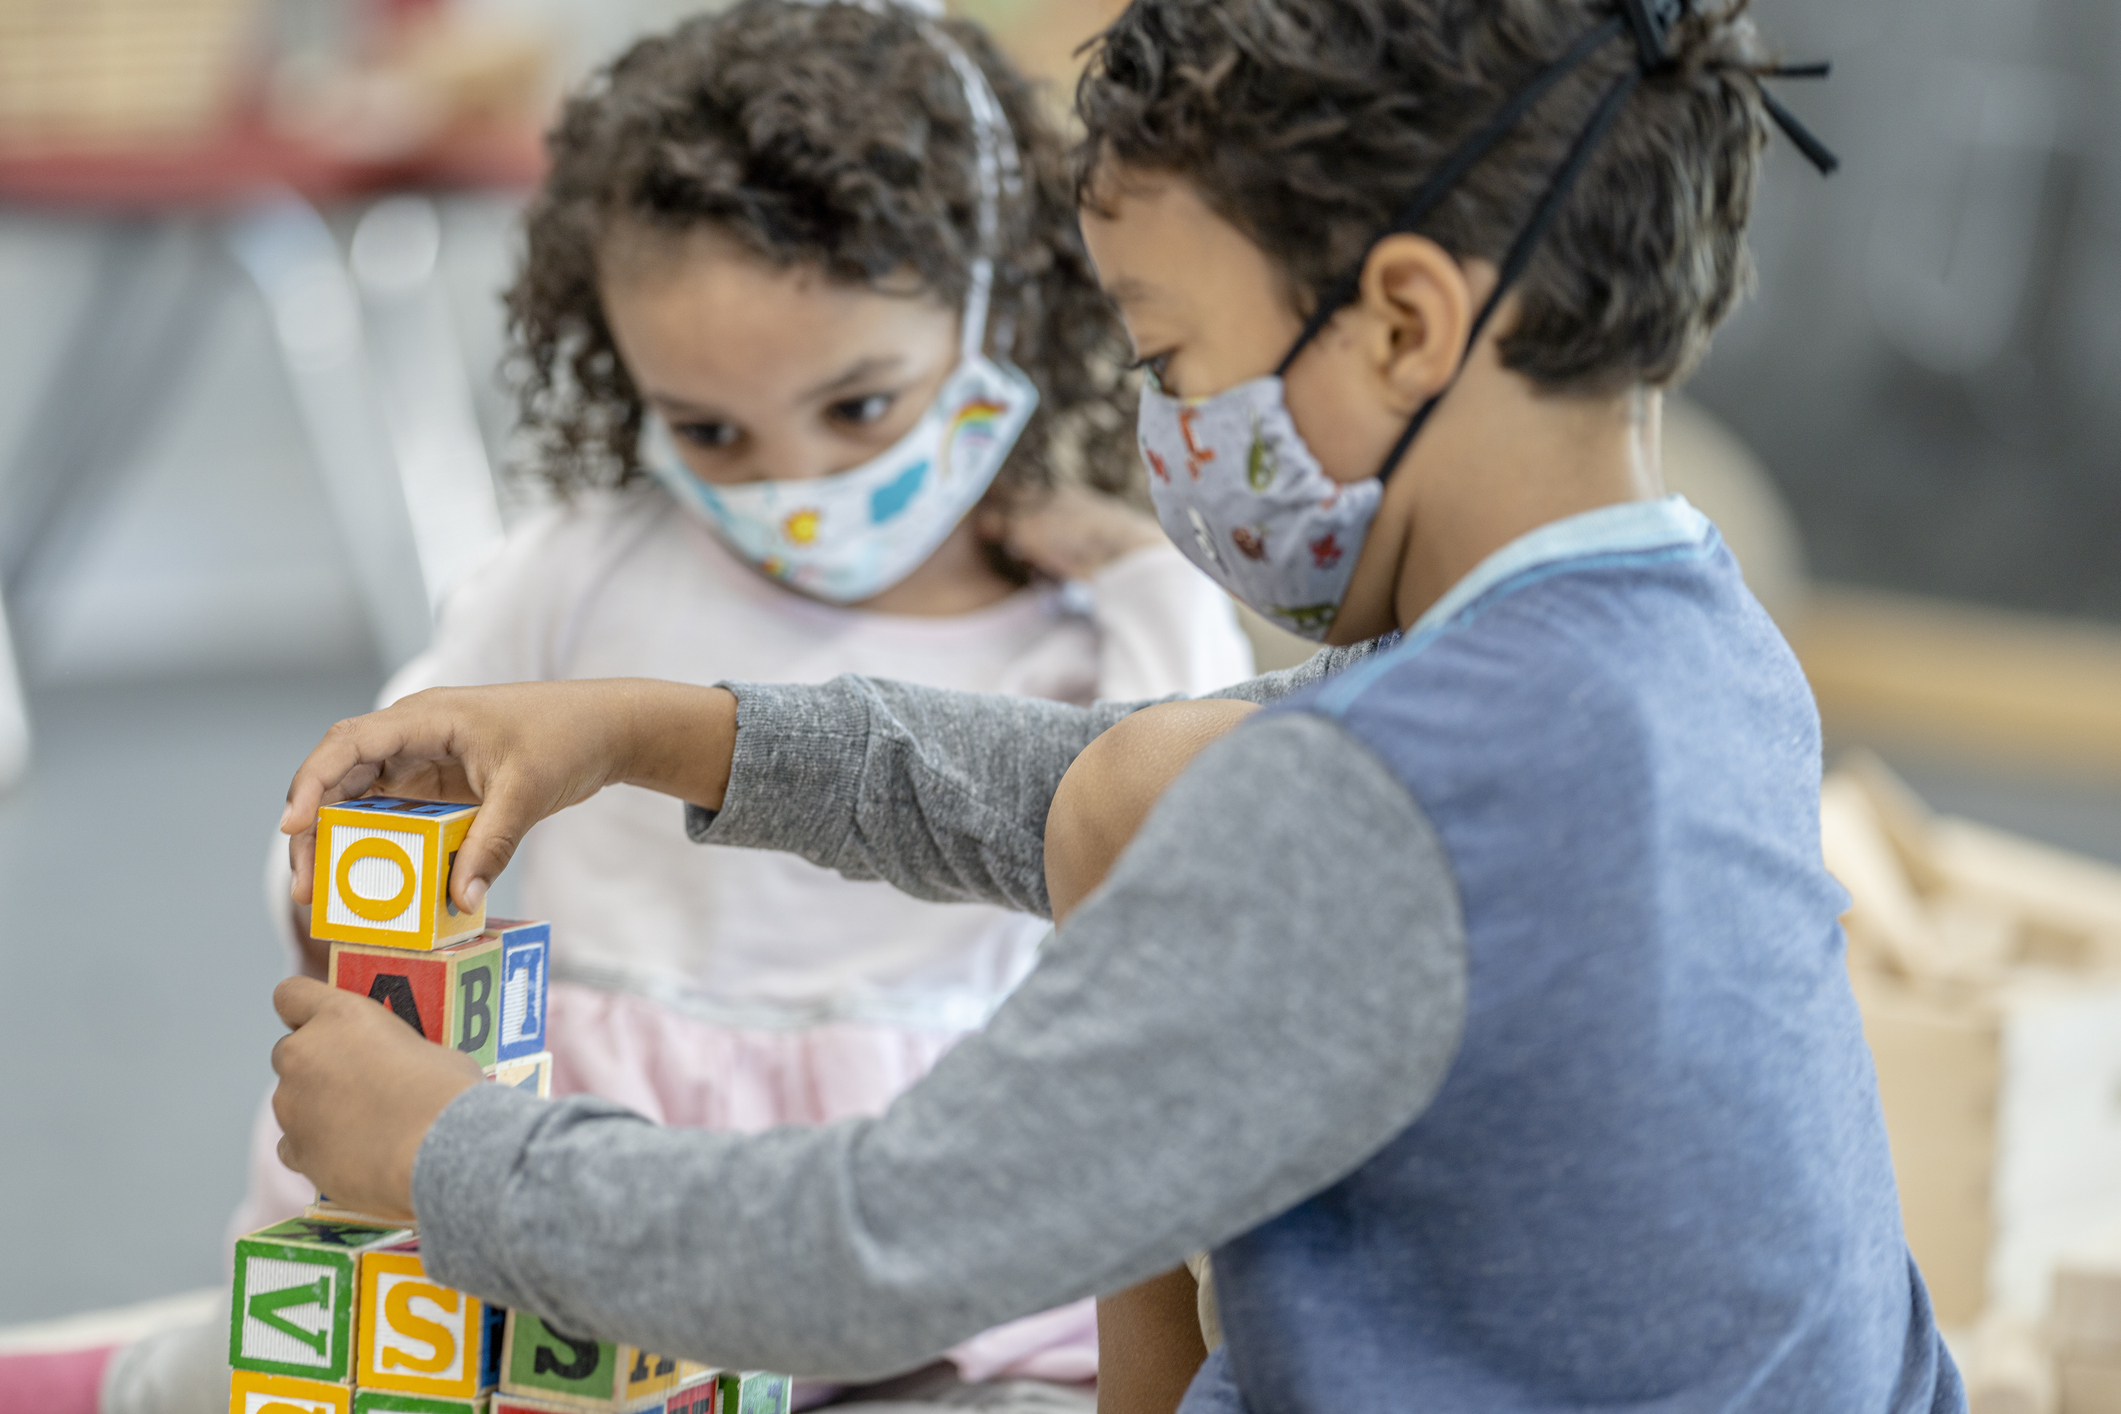 Children playing at daycare while wearing masks